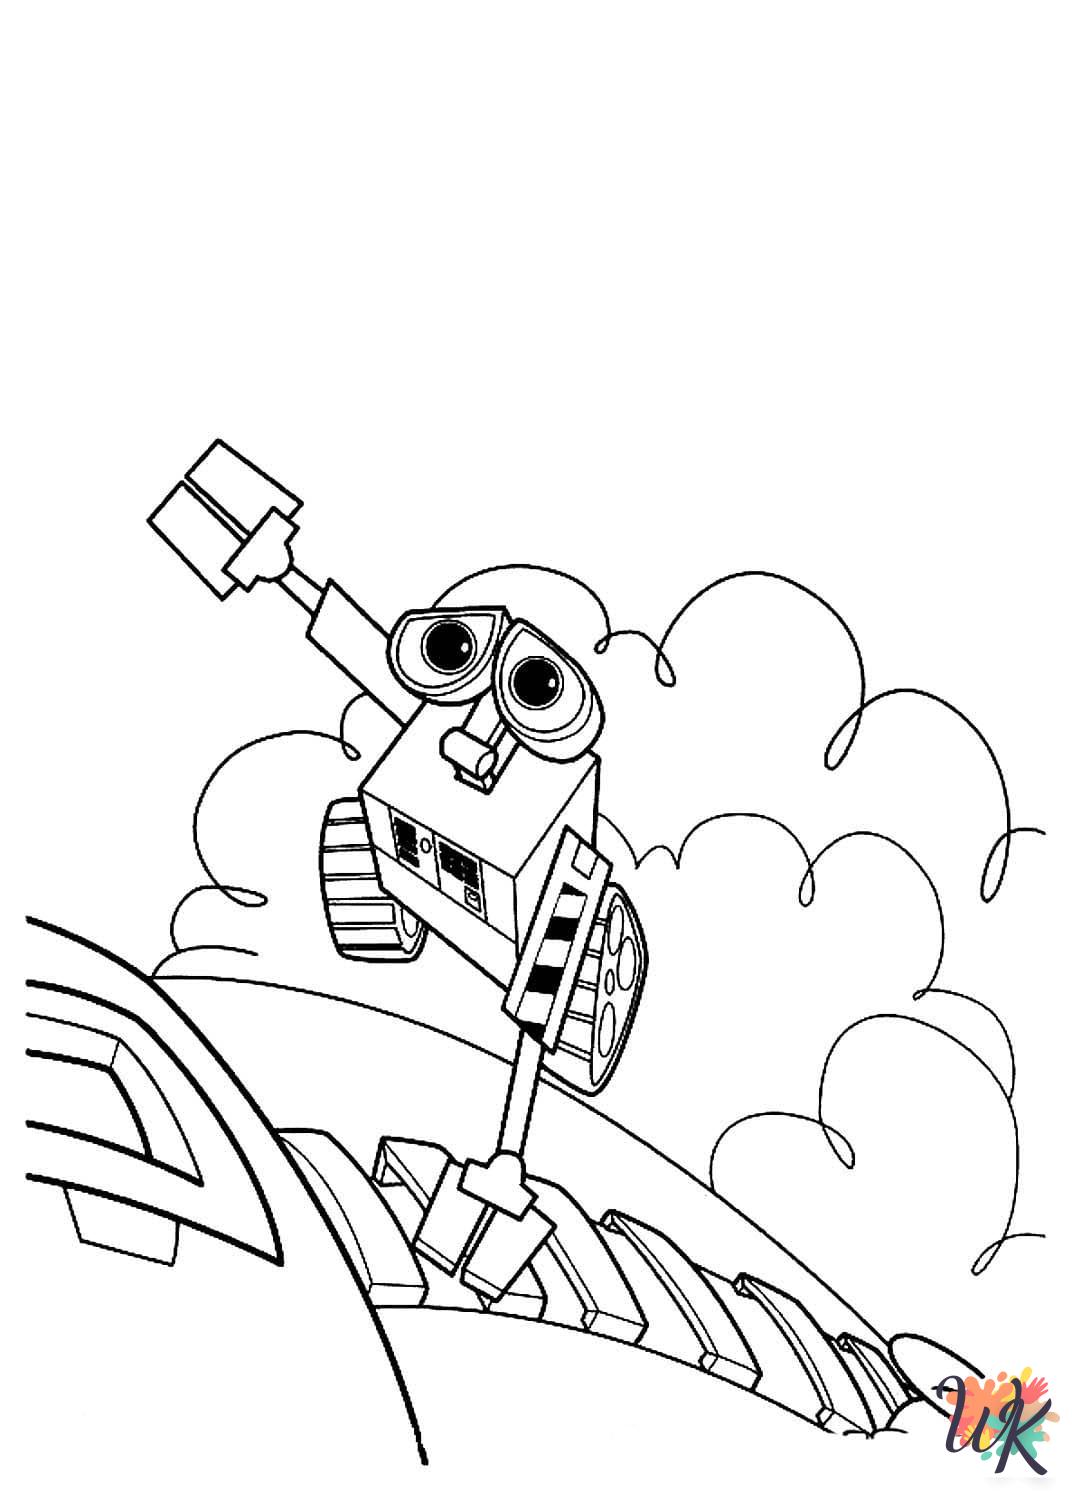 WALL-E coloring pages for adults